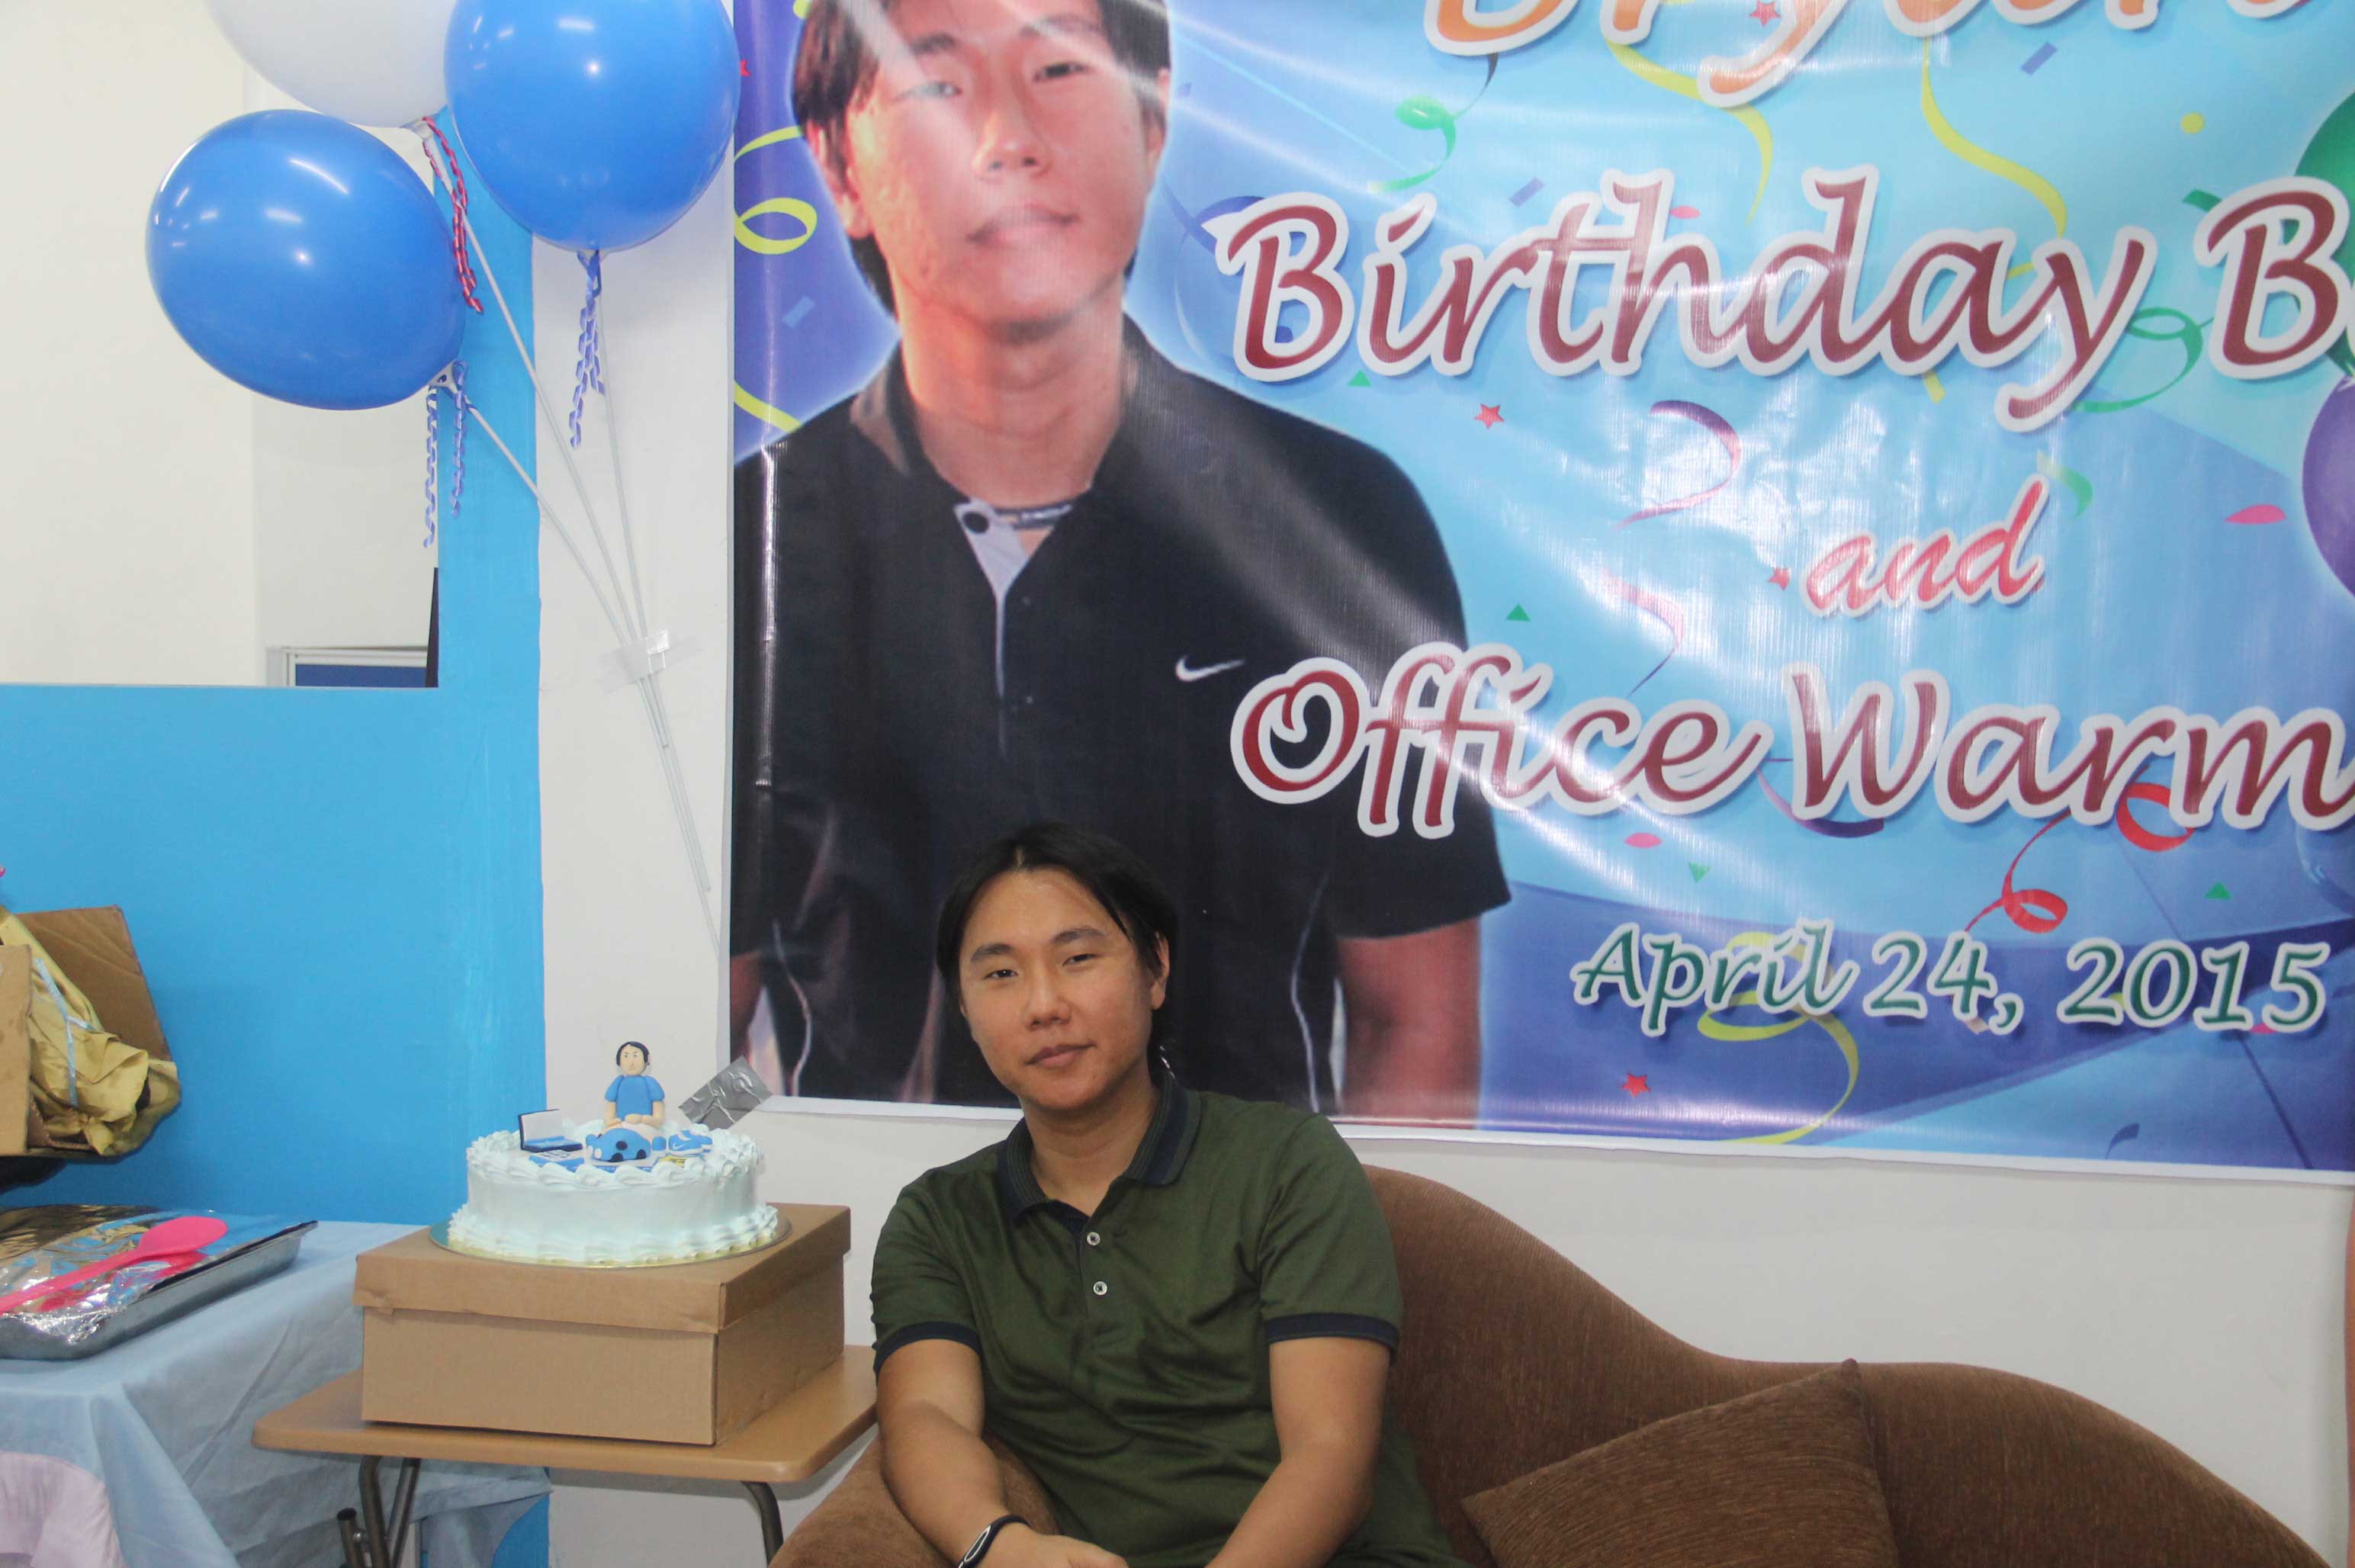 A Glimpse Of Back-to-Back Celebration: LBI’s President’s Birthday And Office Warming